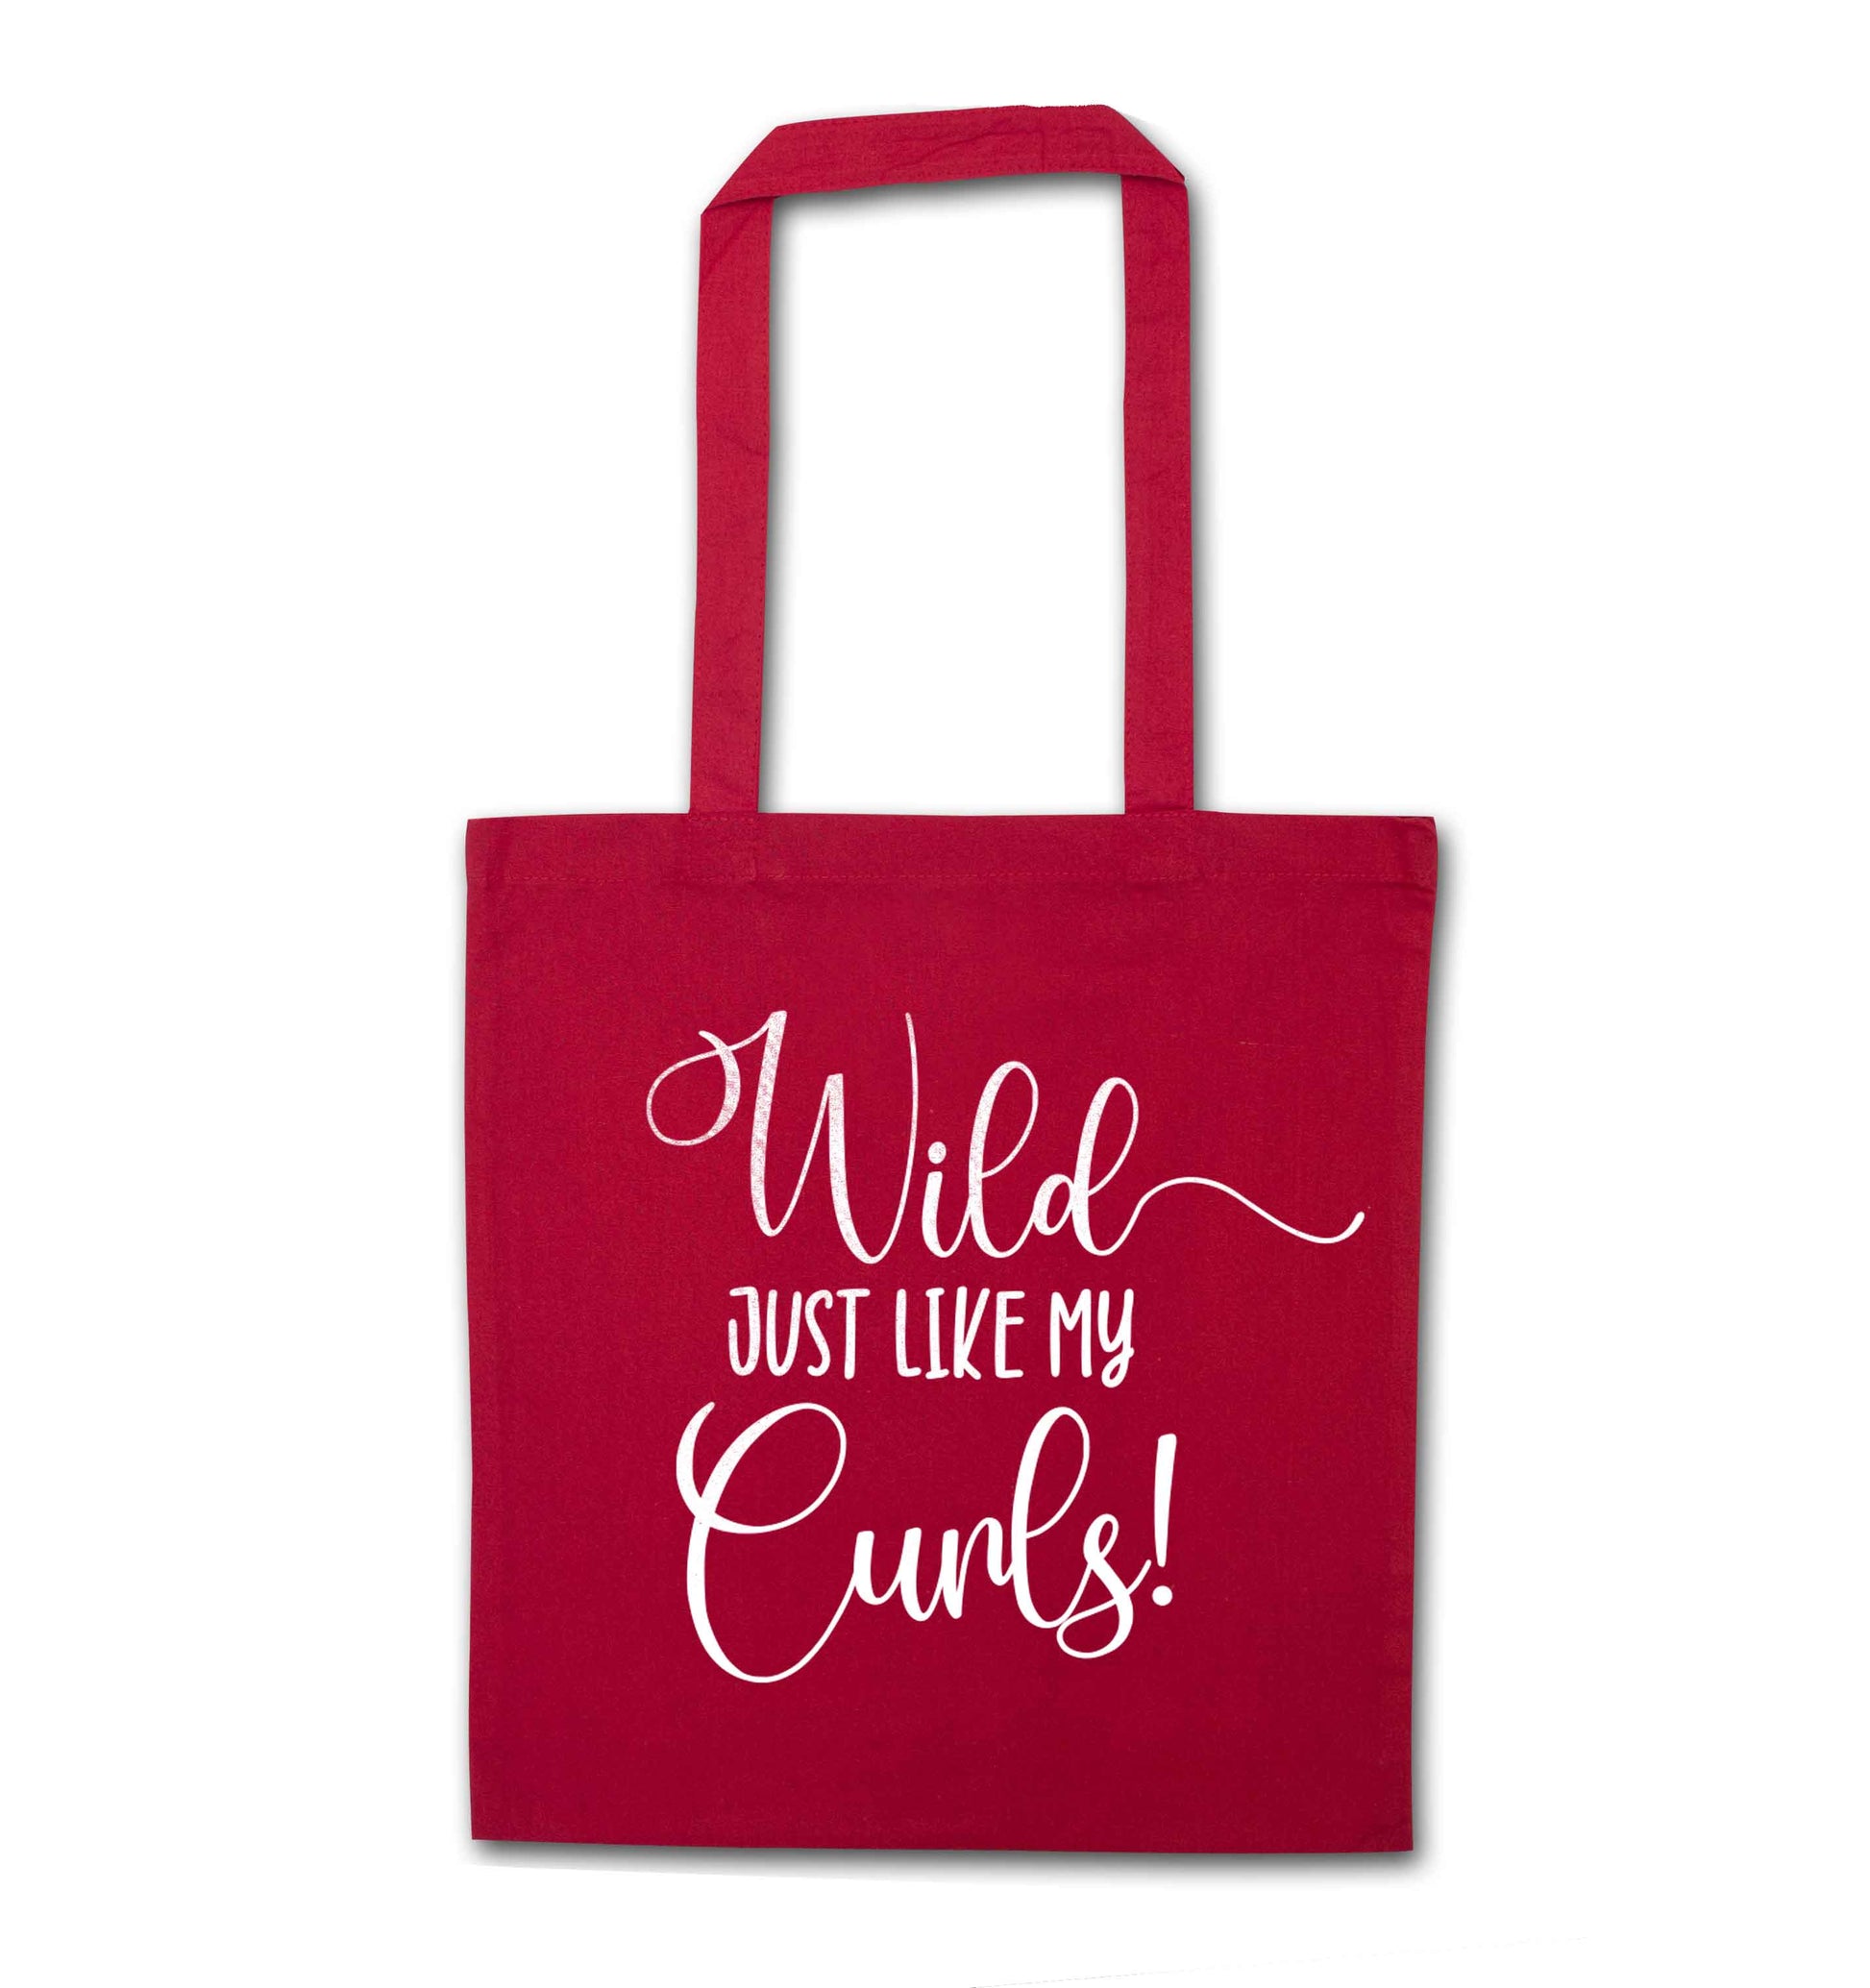 Wild just like my curls red tote bag